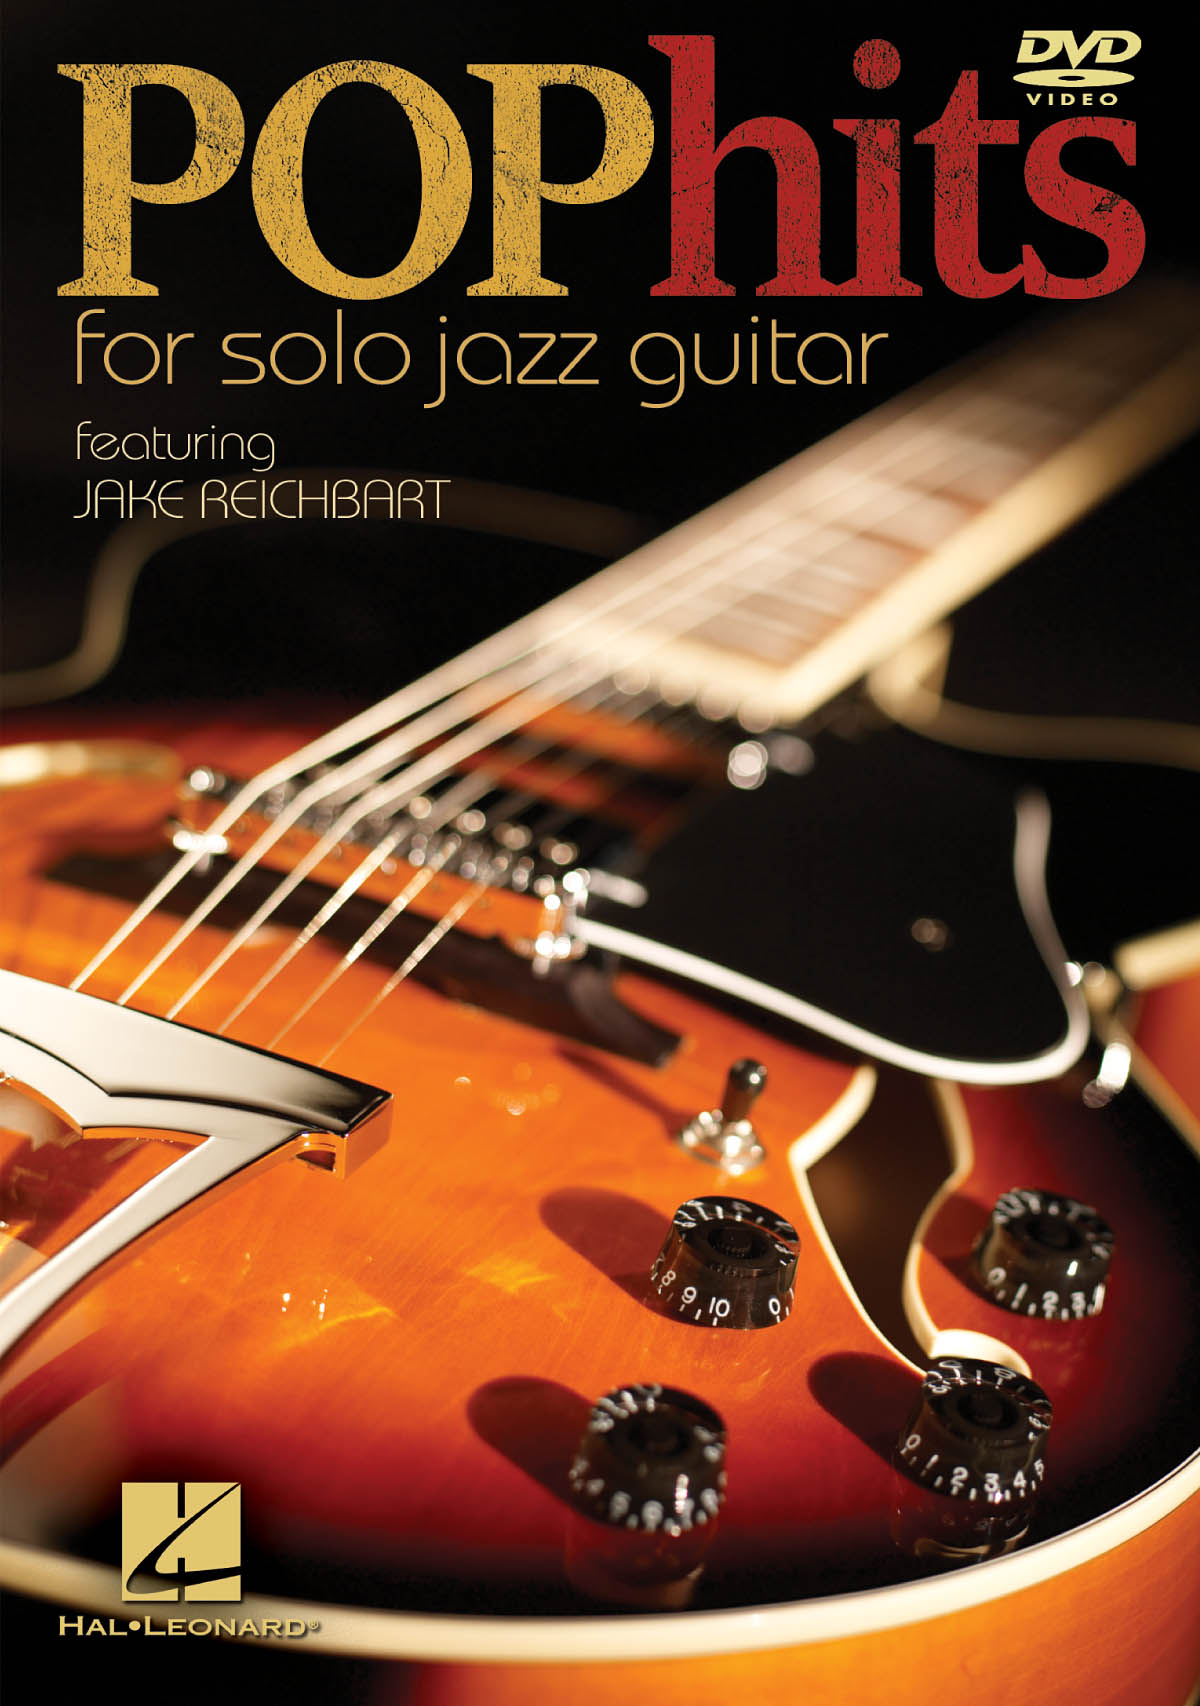 Pop Hits for Solo Jazz Guitar: Drums: DVD